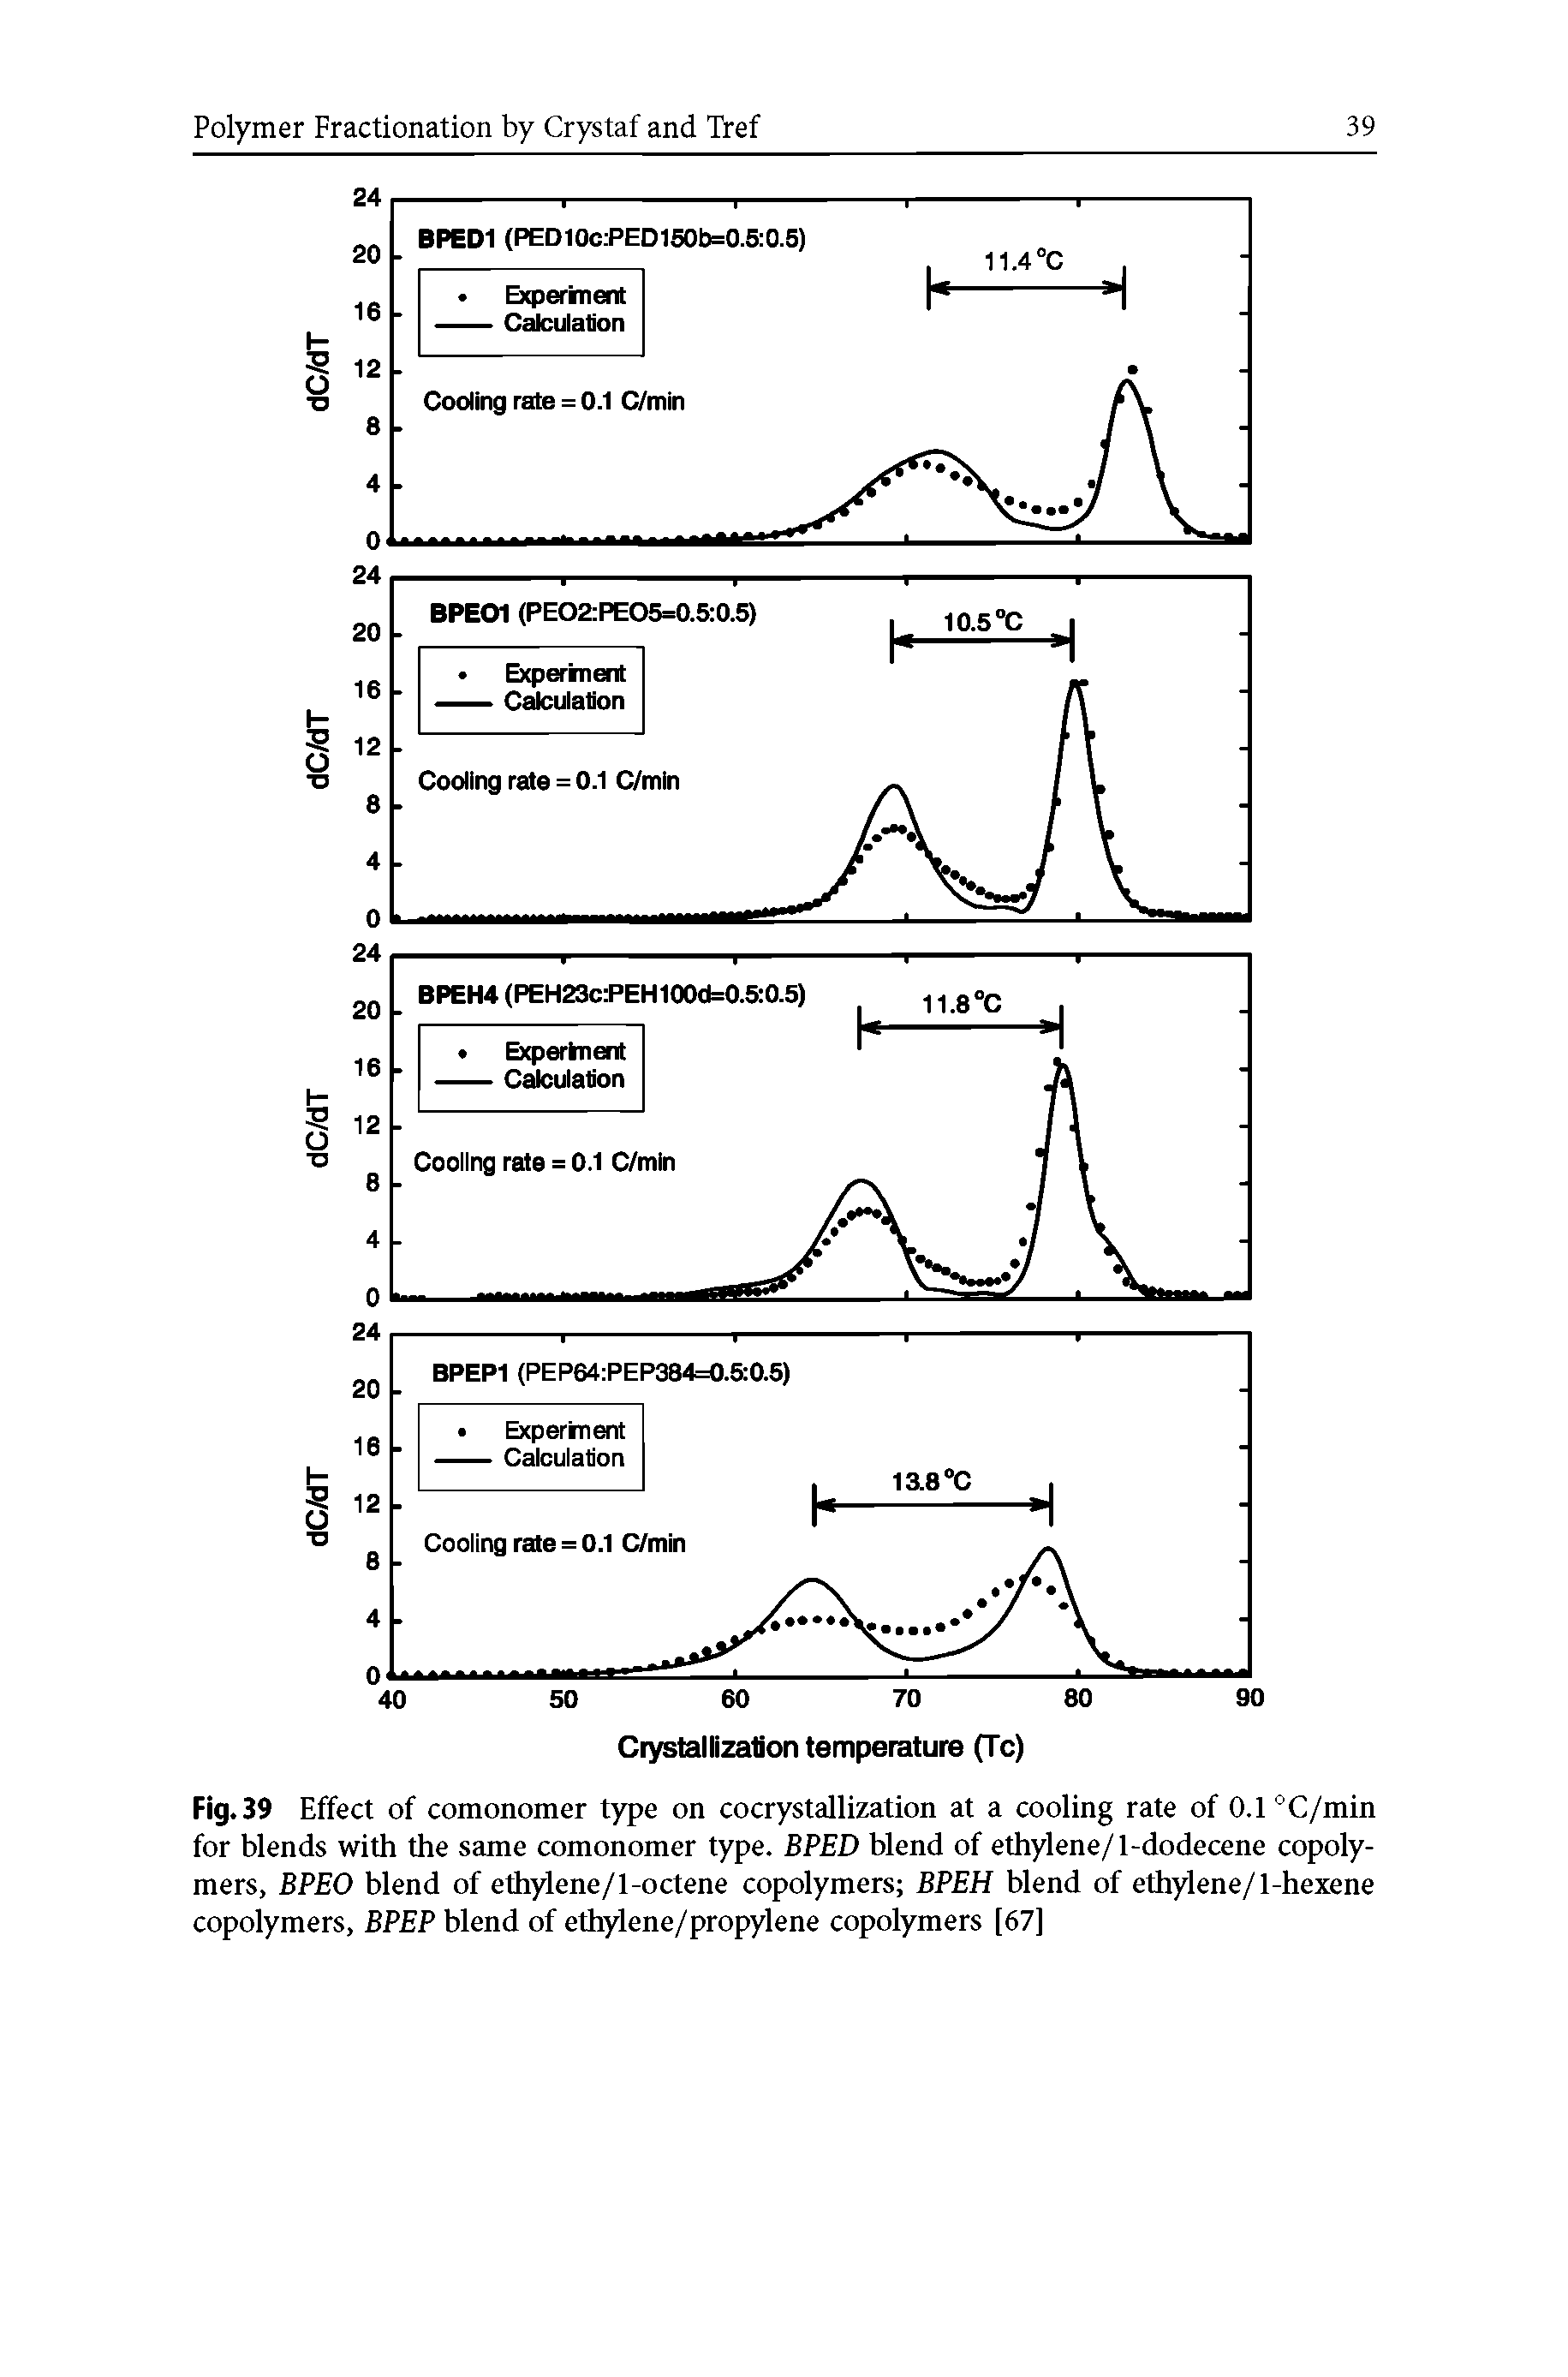 Fig. 39 Effect of comonomer type on cocrystallization at a cooling rate of 0.1 °C/min for blends with the same comonomer type. BPED blend of ethylene/1-dodecene copolymers, BPEO blend of ethylene/l-octene copolymers BPEH blend of ethylene/1-hexene copolymers, BPEP blend of ethjdene/propylene copolymers [67]...